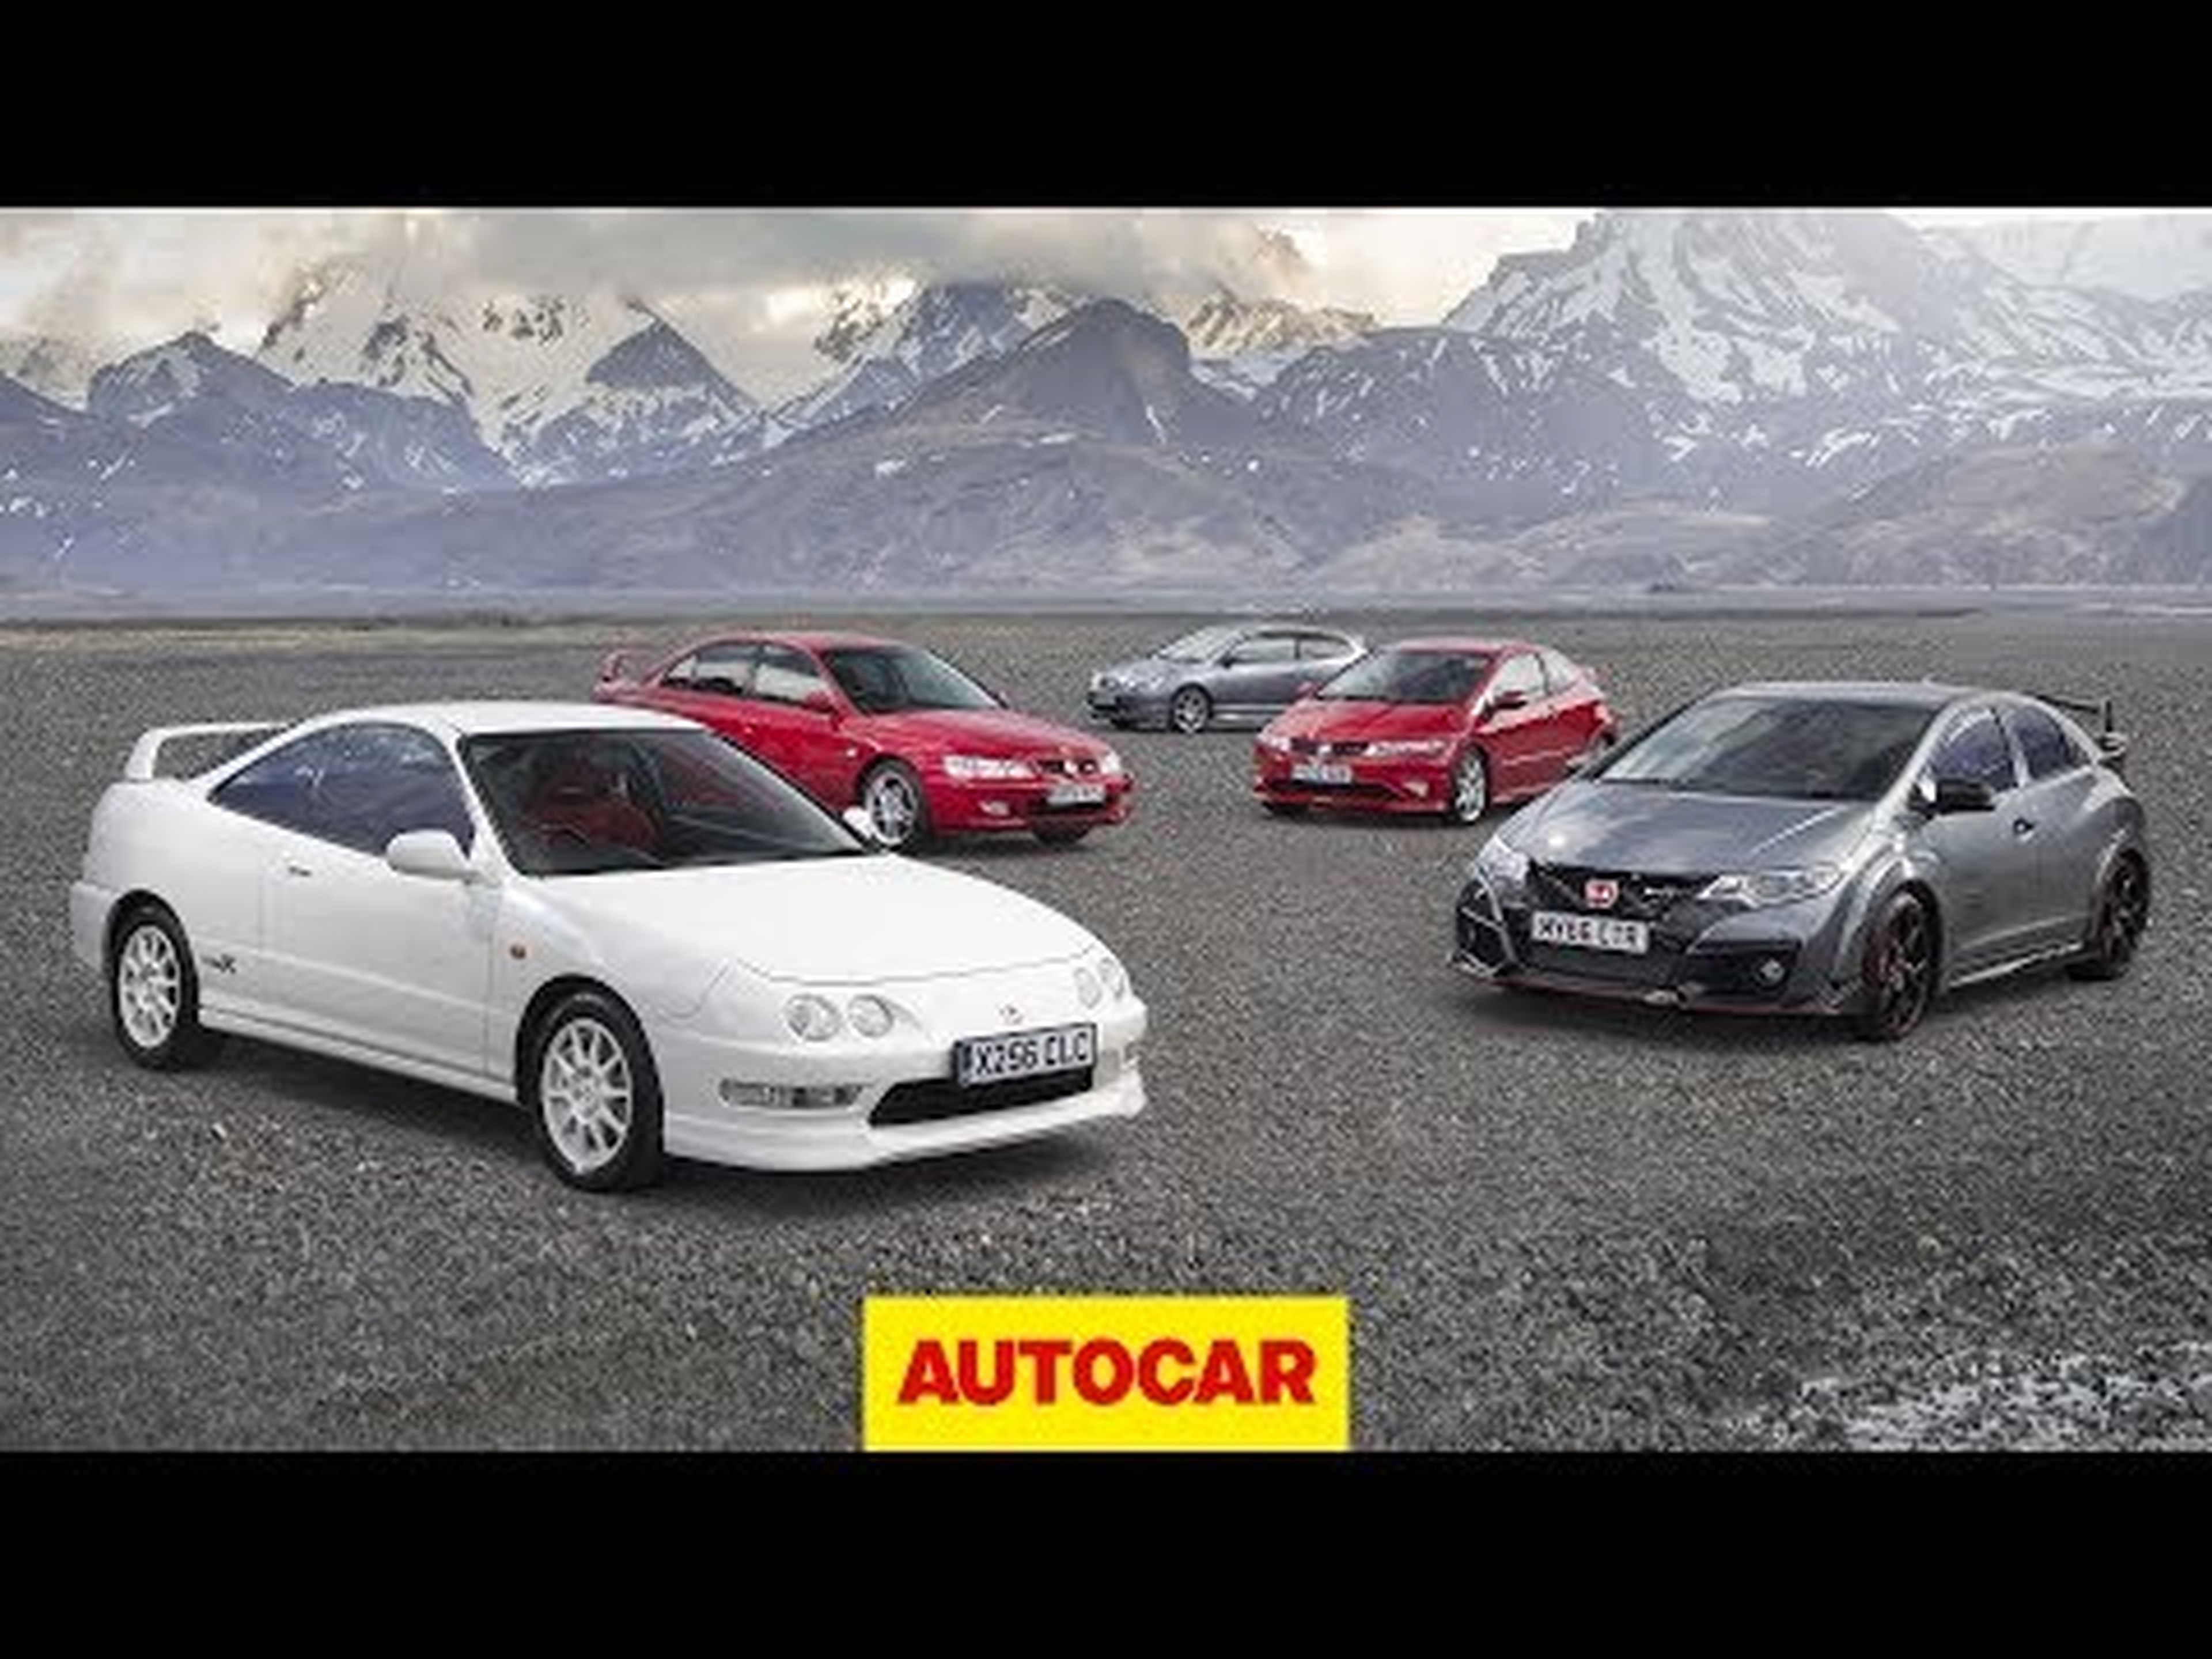 Promoted: 25 years of Honda Type R | Legends road trip with Civic, Integra and Accord